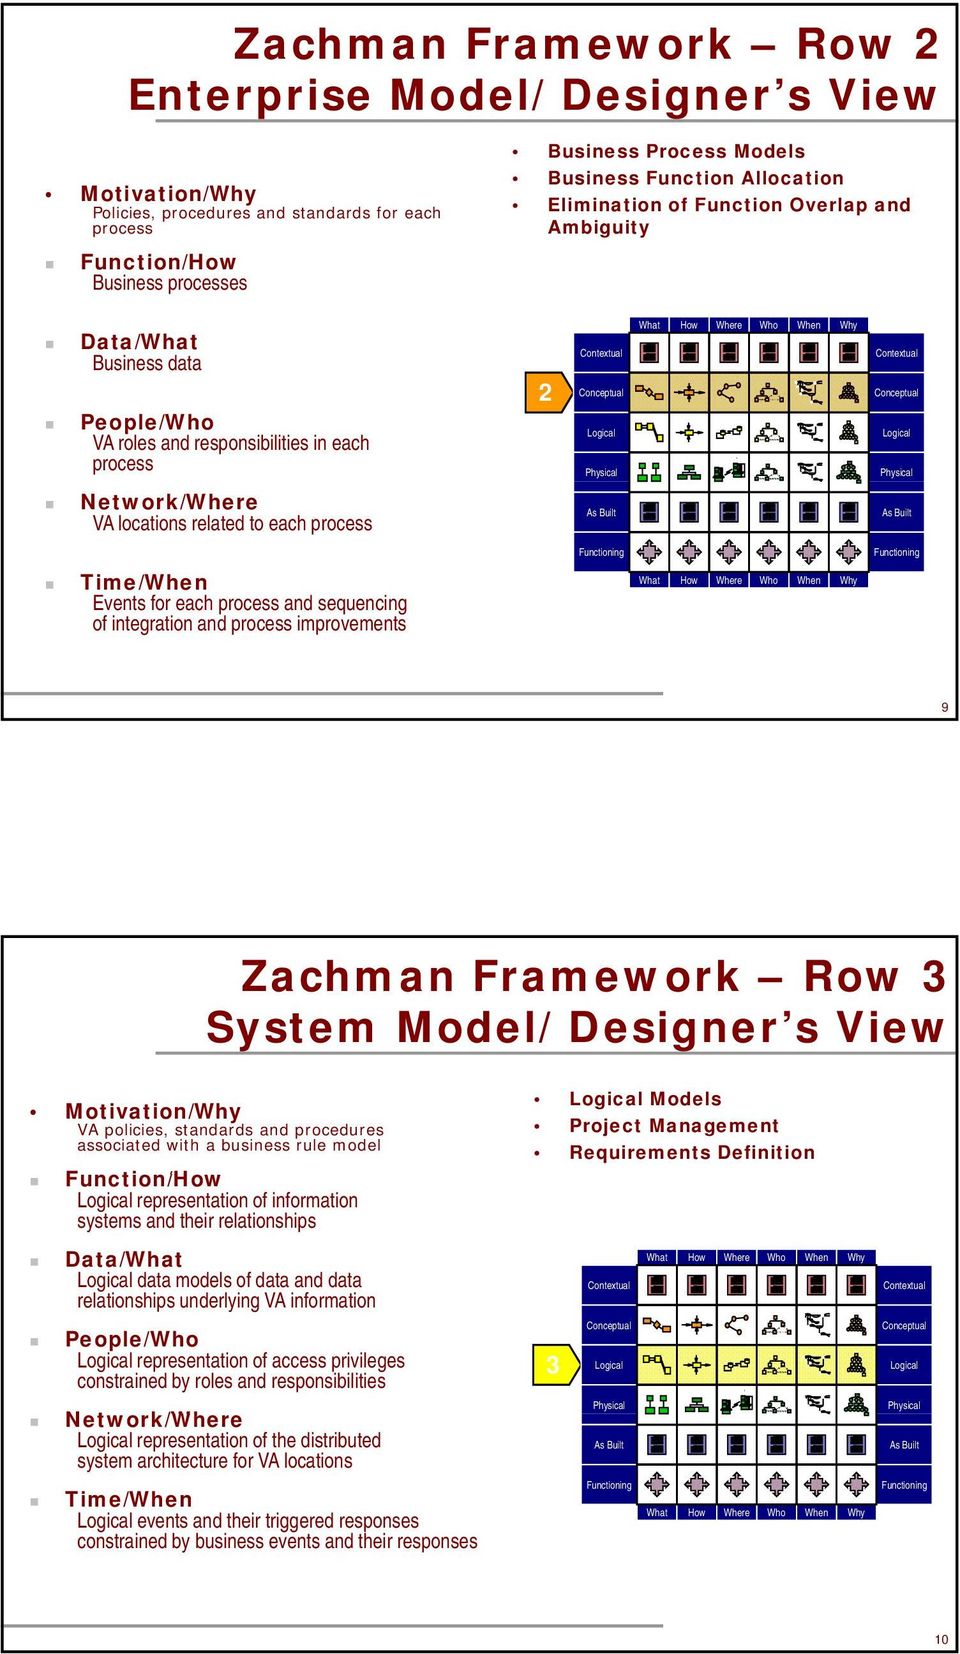 each process and sequencing of integration and process improvements 9 Zachman Framework Row 3 System Model/Designer s View Motivation/ VA policies, standards and procedures associated with a business